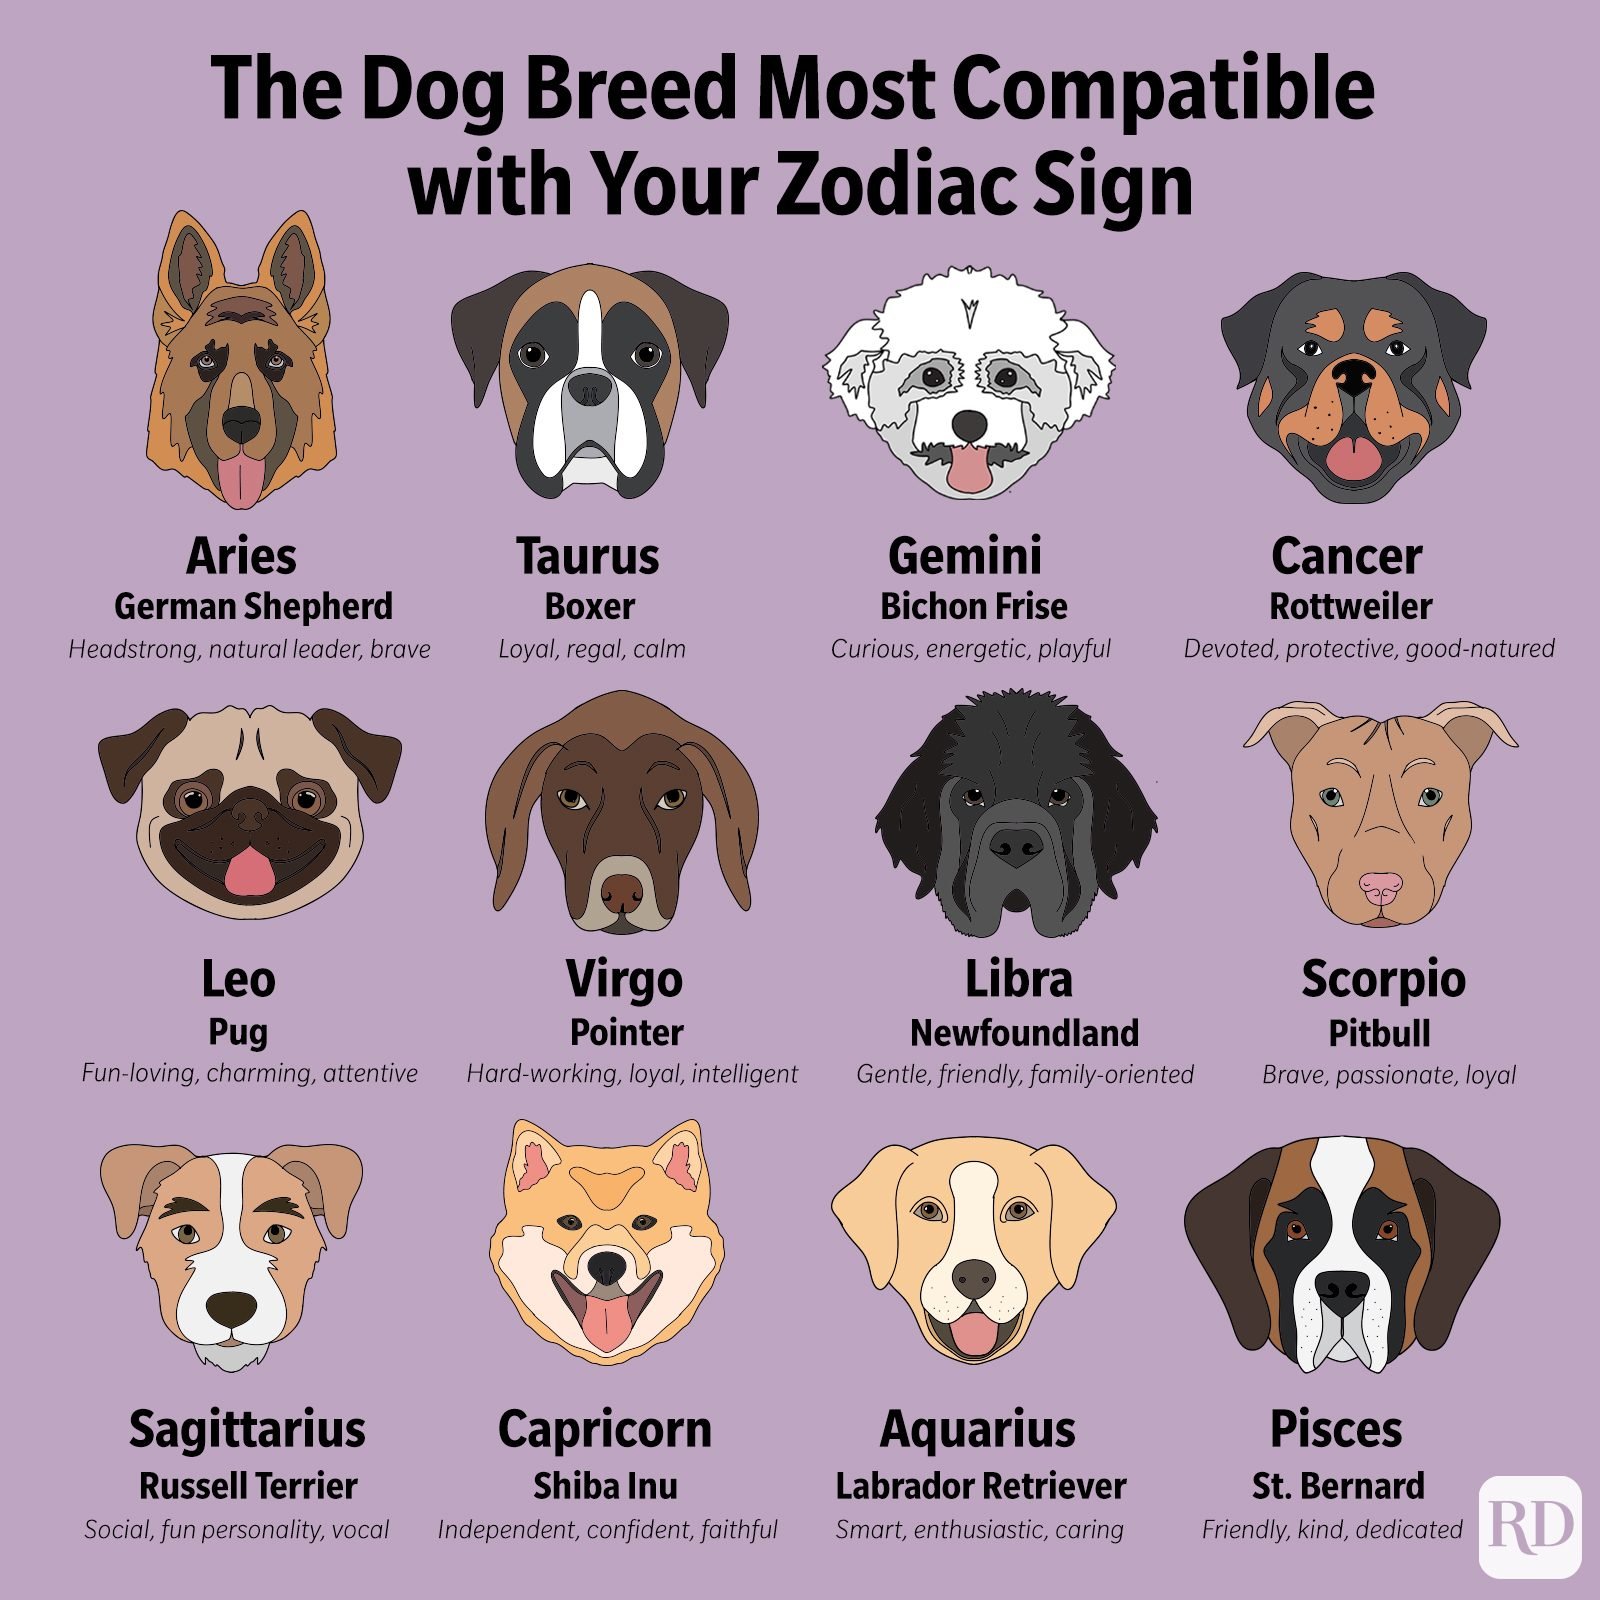 This Is the Dog Breed That's Most Compatible with Your Zodiac Sign